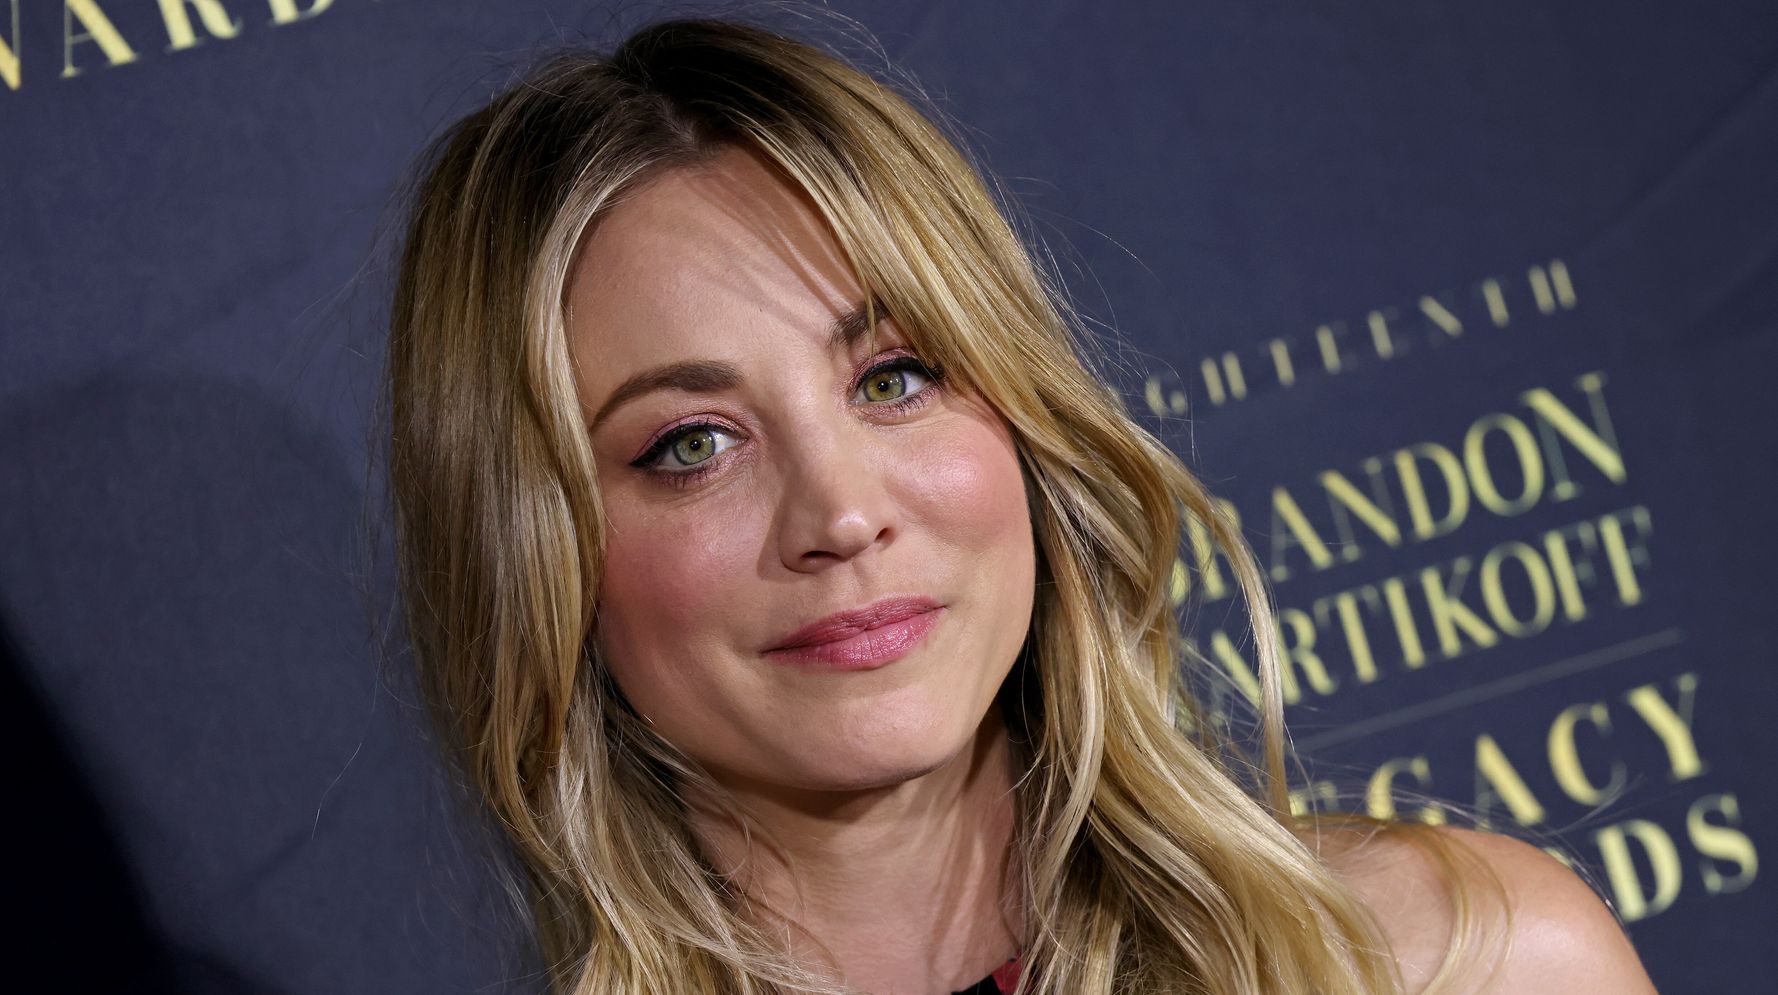 Kaley Cuoco Pov Porn - Kaley Cuoco Had An Intervention Post-Divorce: 'I Was Really Losing My Mind'  | HuffPost Entertainment